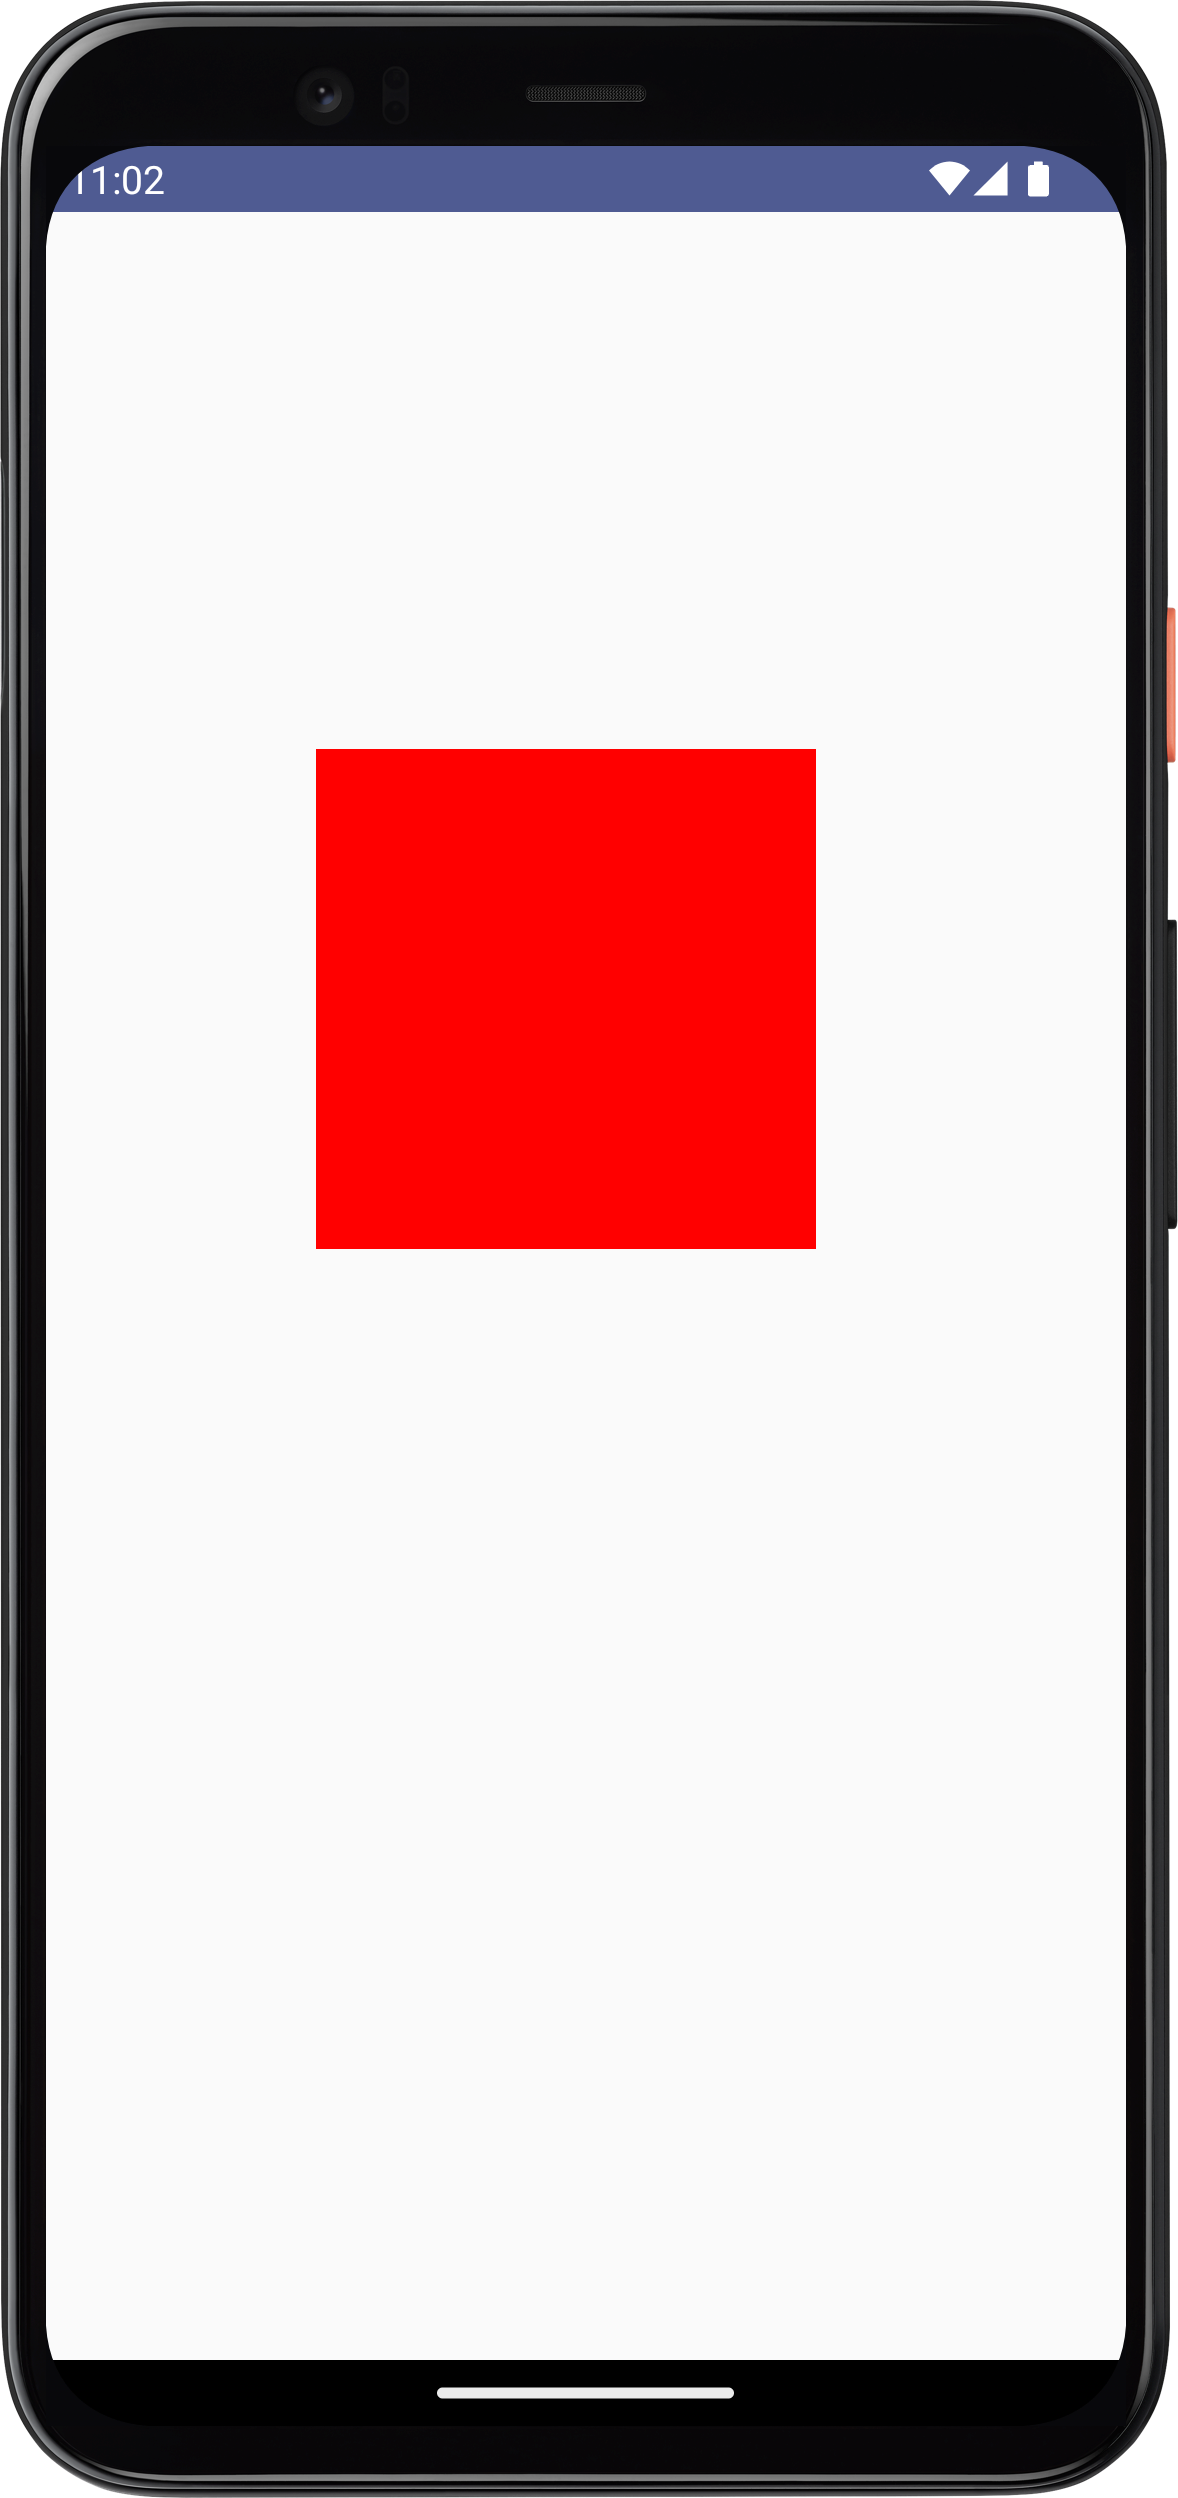 How to Draw Rectangle Using Canvas in Android Jetpack Compose Coding